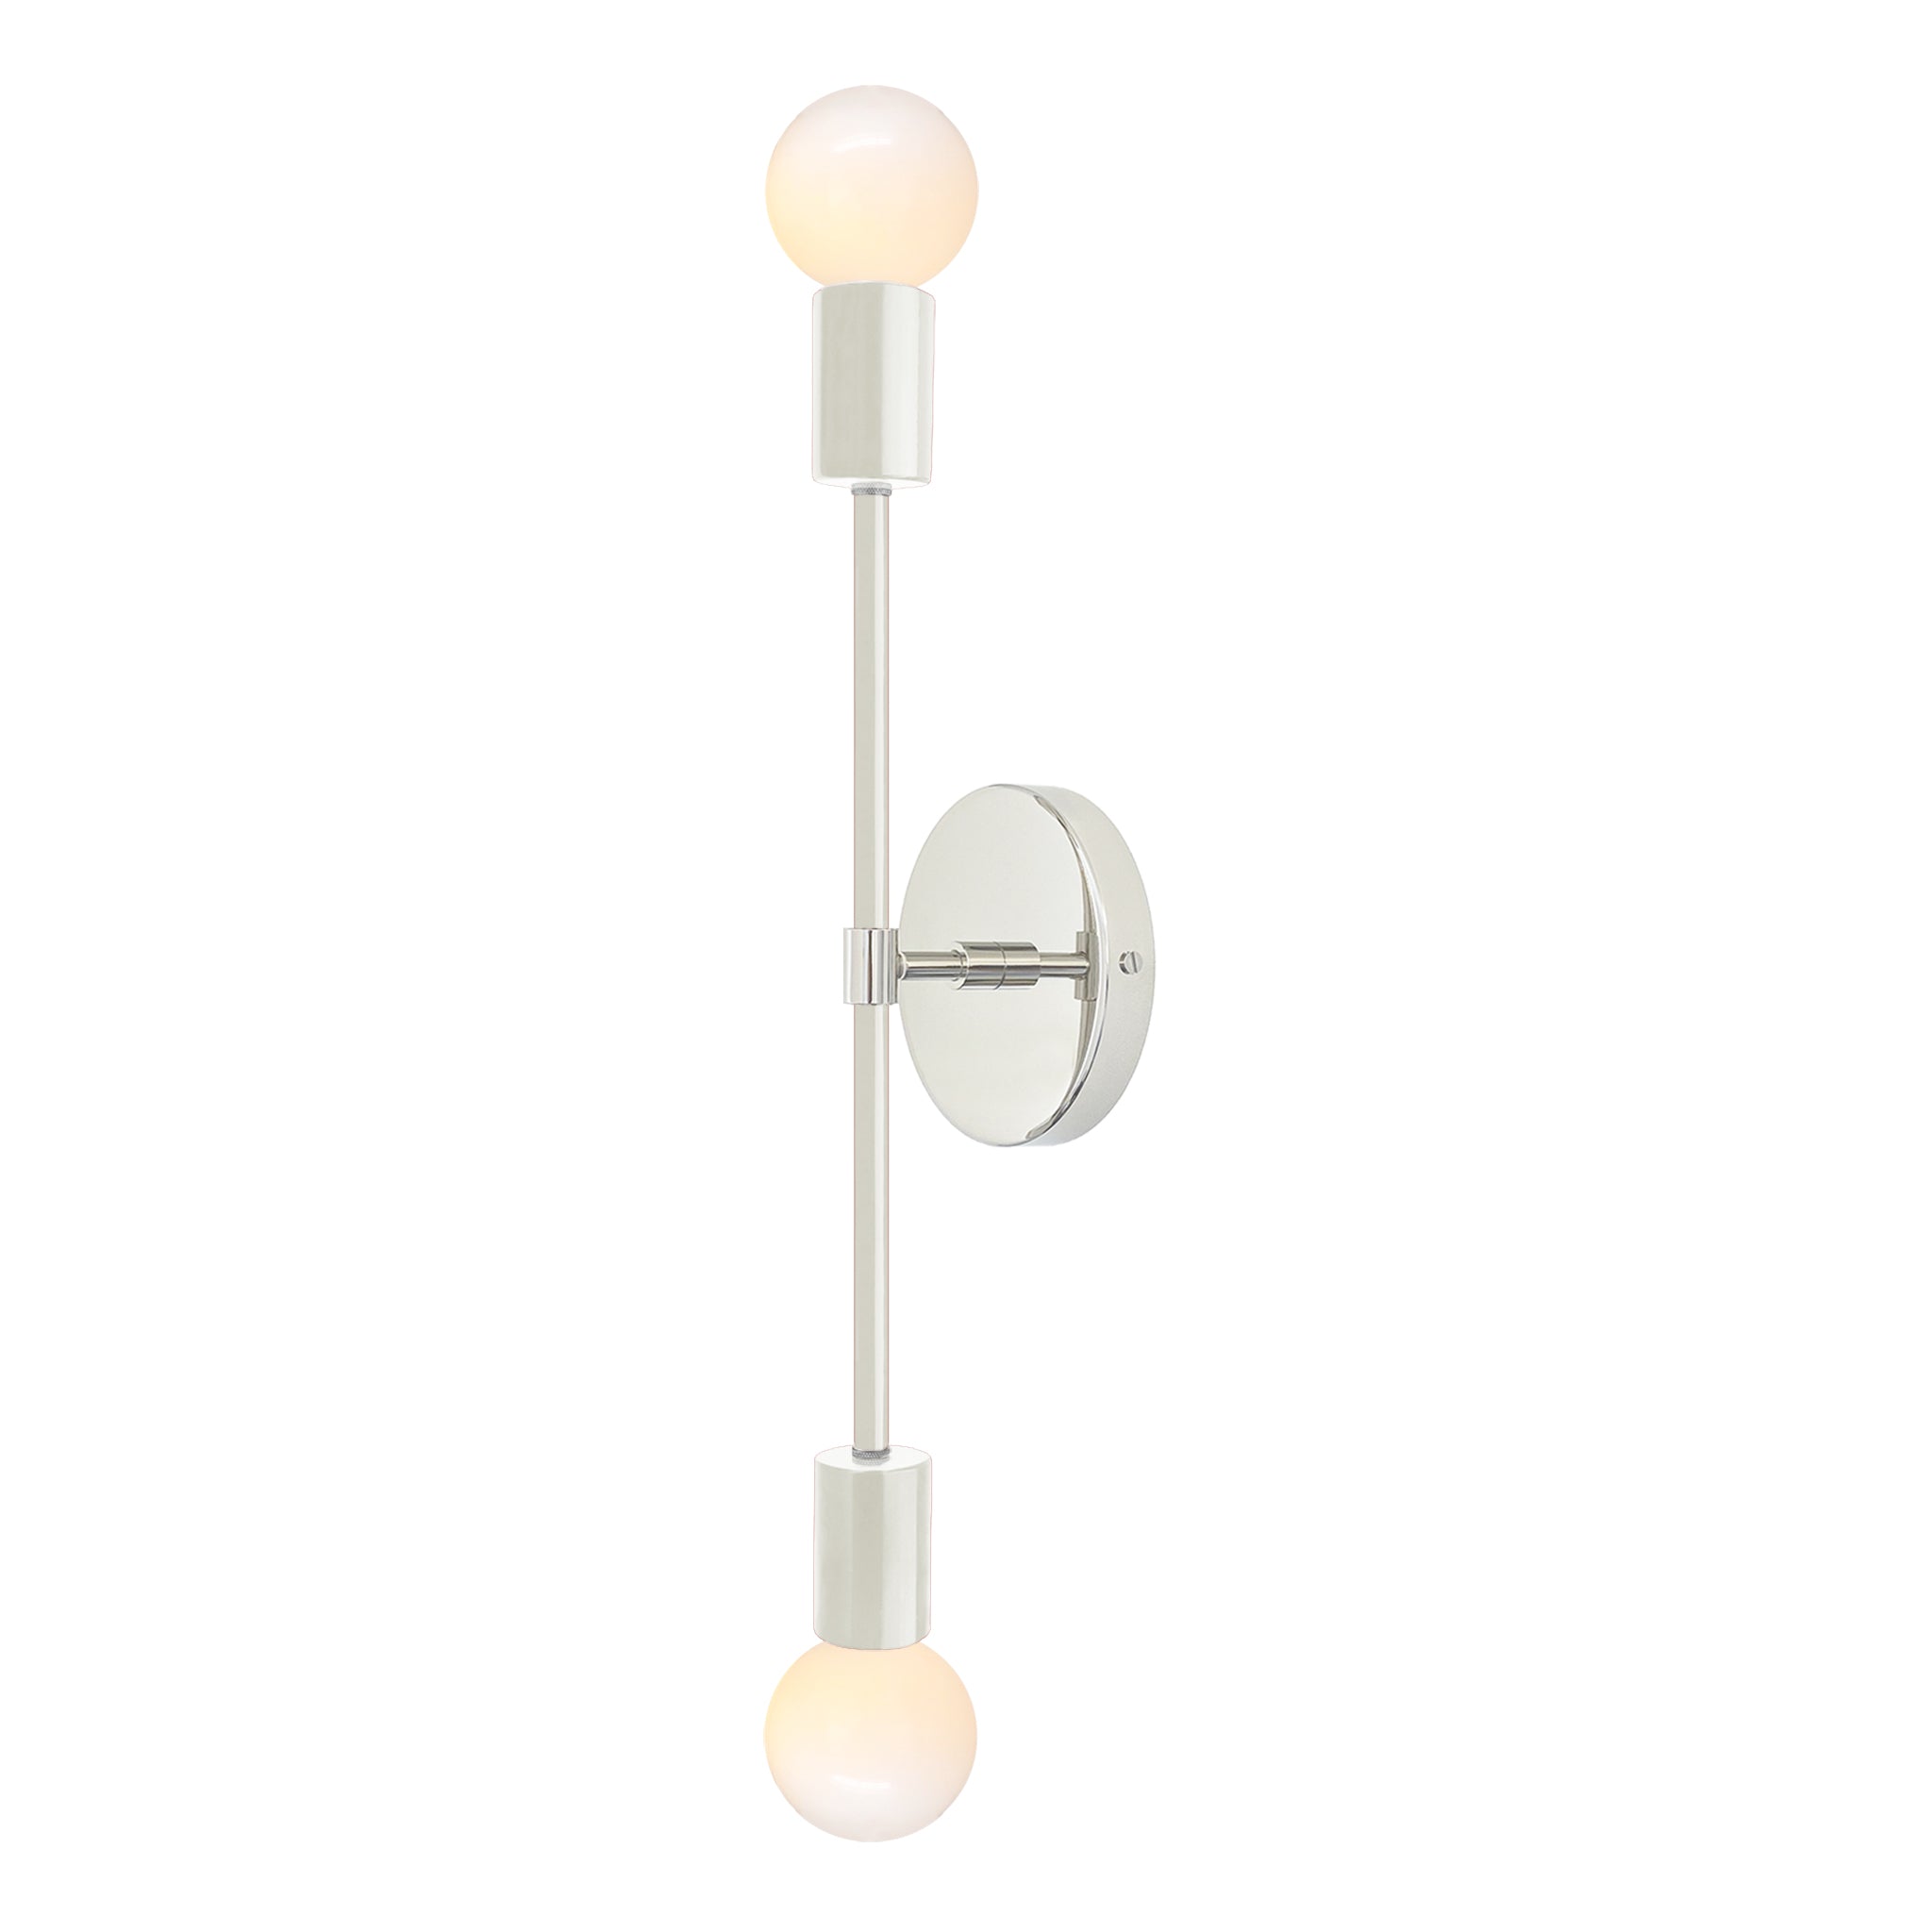 Nickel and bone color Scepter sconce 18" Dutton Brown lighting